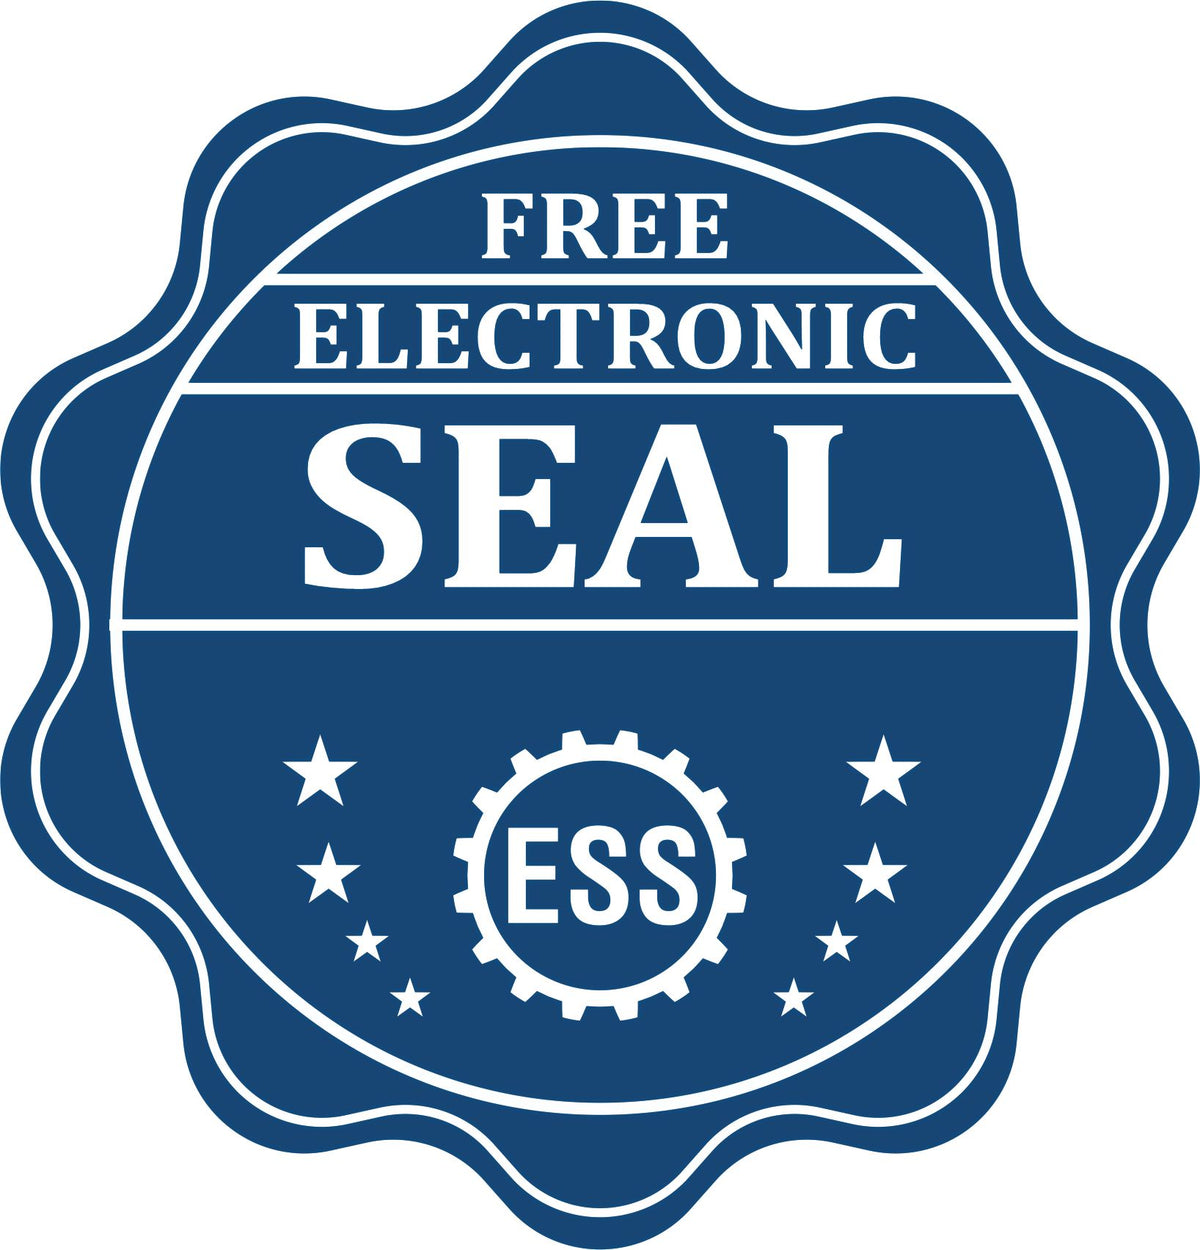 A badge showing a free electronic seal for the Soft North Carolina Professional Engineer Seal with stars and the ESS gear on the emblem.